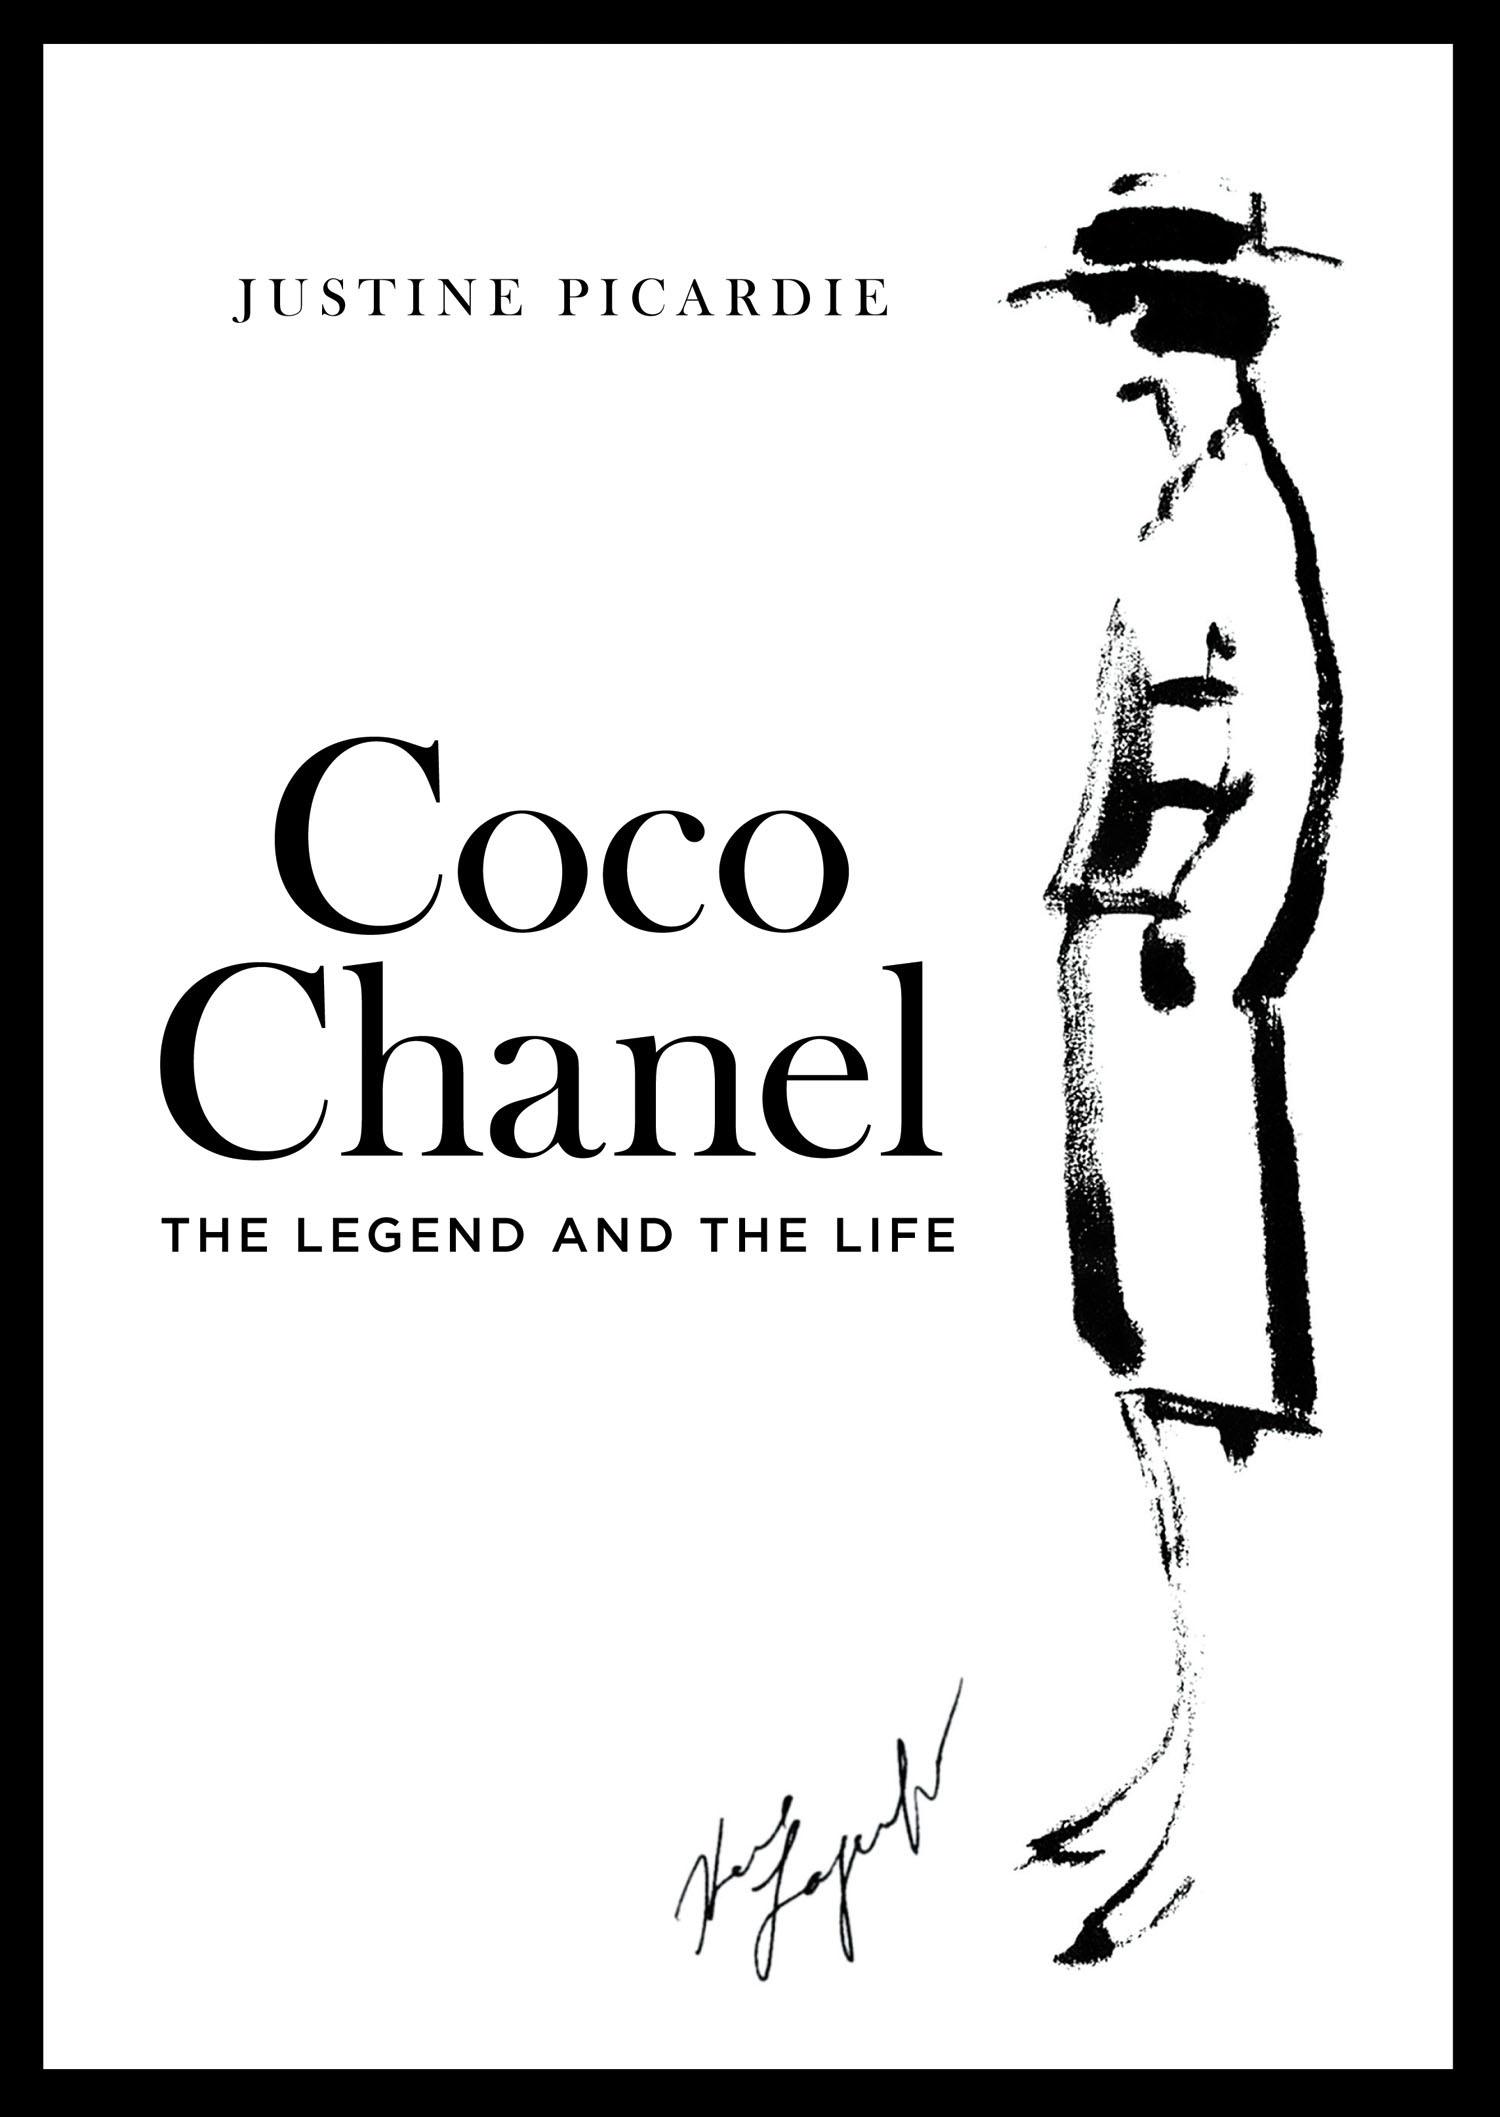 Coco Chanel / The Legend and the Life / Justine Picardie / Taschenbuch / 345 S. / Englisch / 2011 / Harper Collins Publ. UK / EAN 9780007318995 - Picardie, Justine